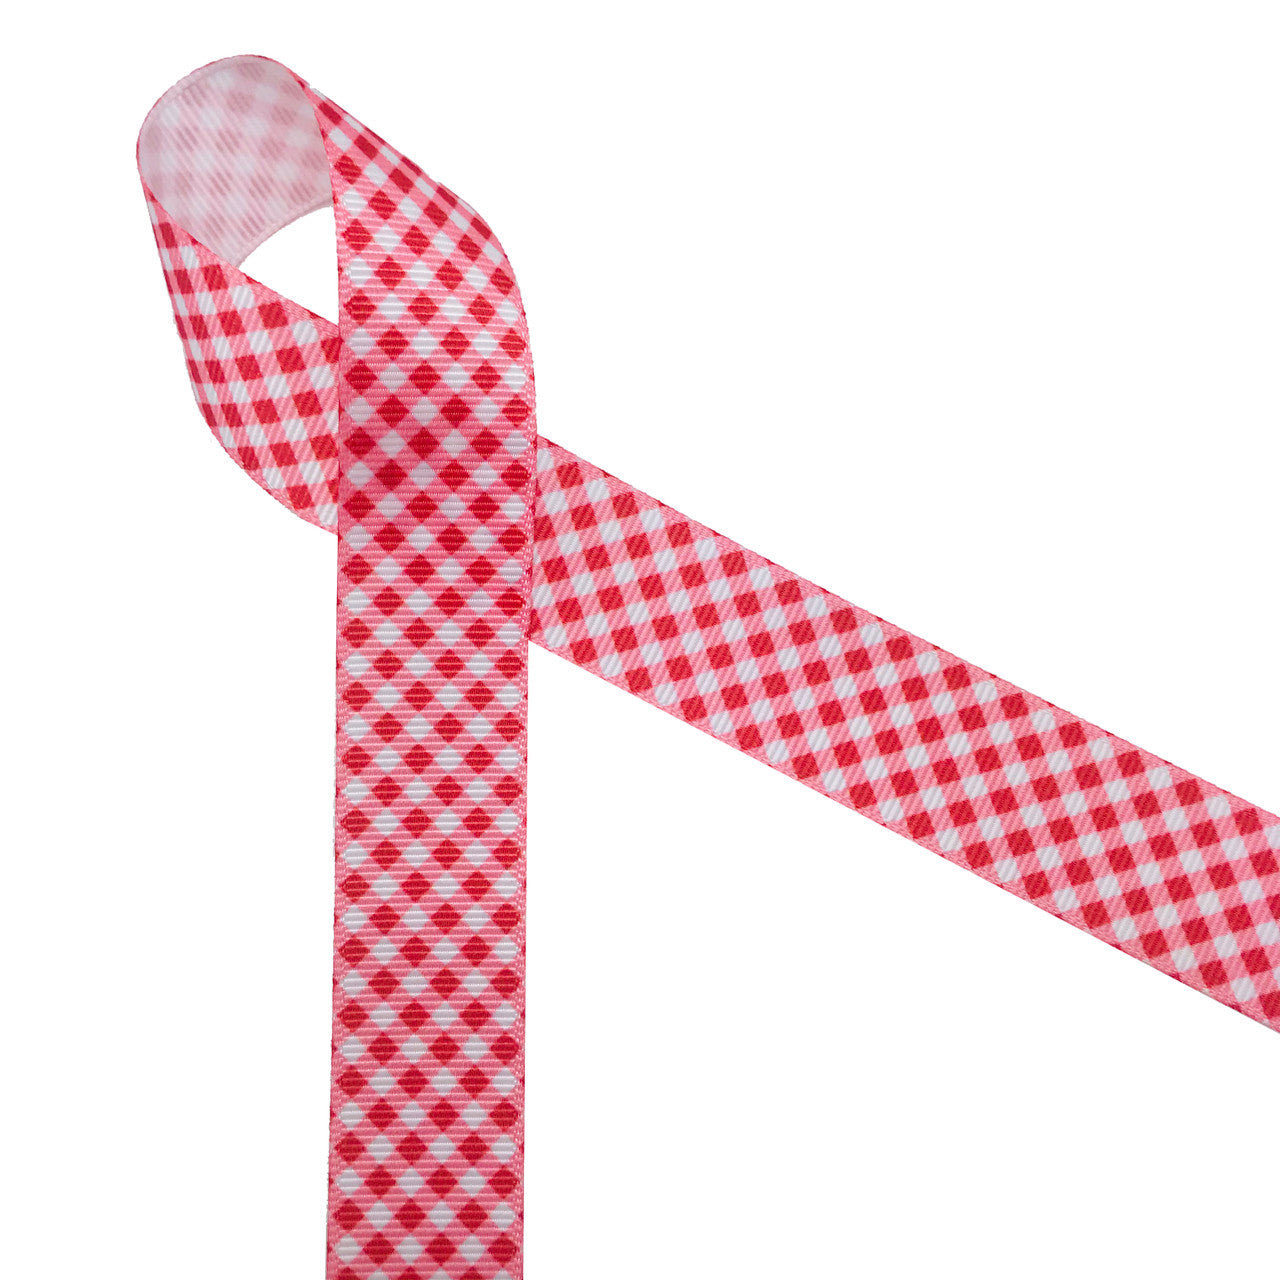 Red and white gingham check printed on 7/8" white grosgrain ribbon is a classic design perfect for so many craft projects, events and gifts! Be sure to have this ribbon on hand for all your creative moments! Designed and printed in the USA